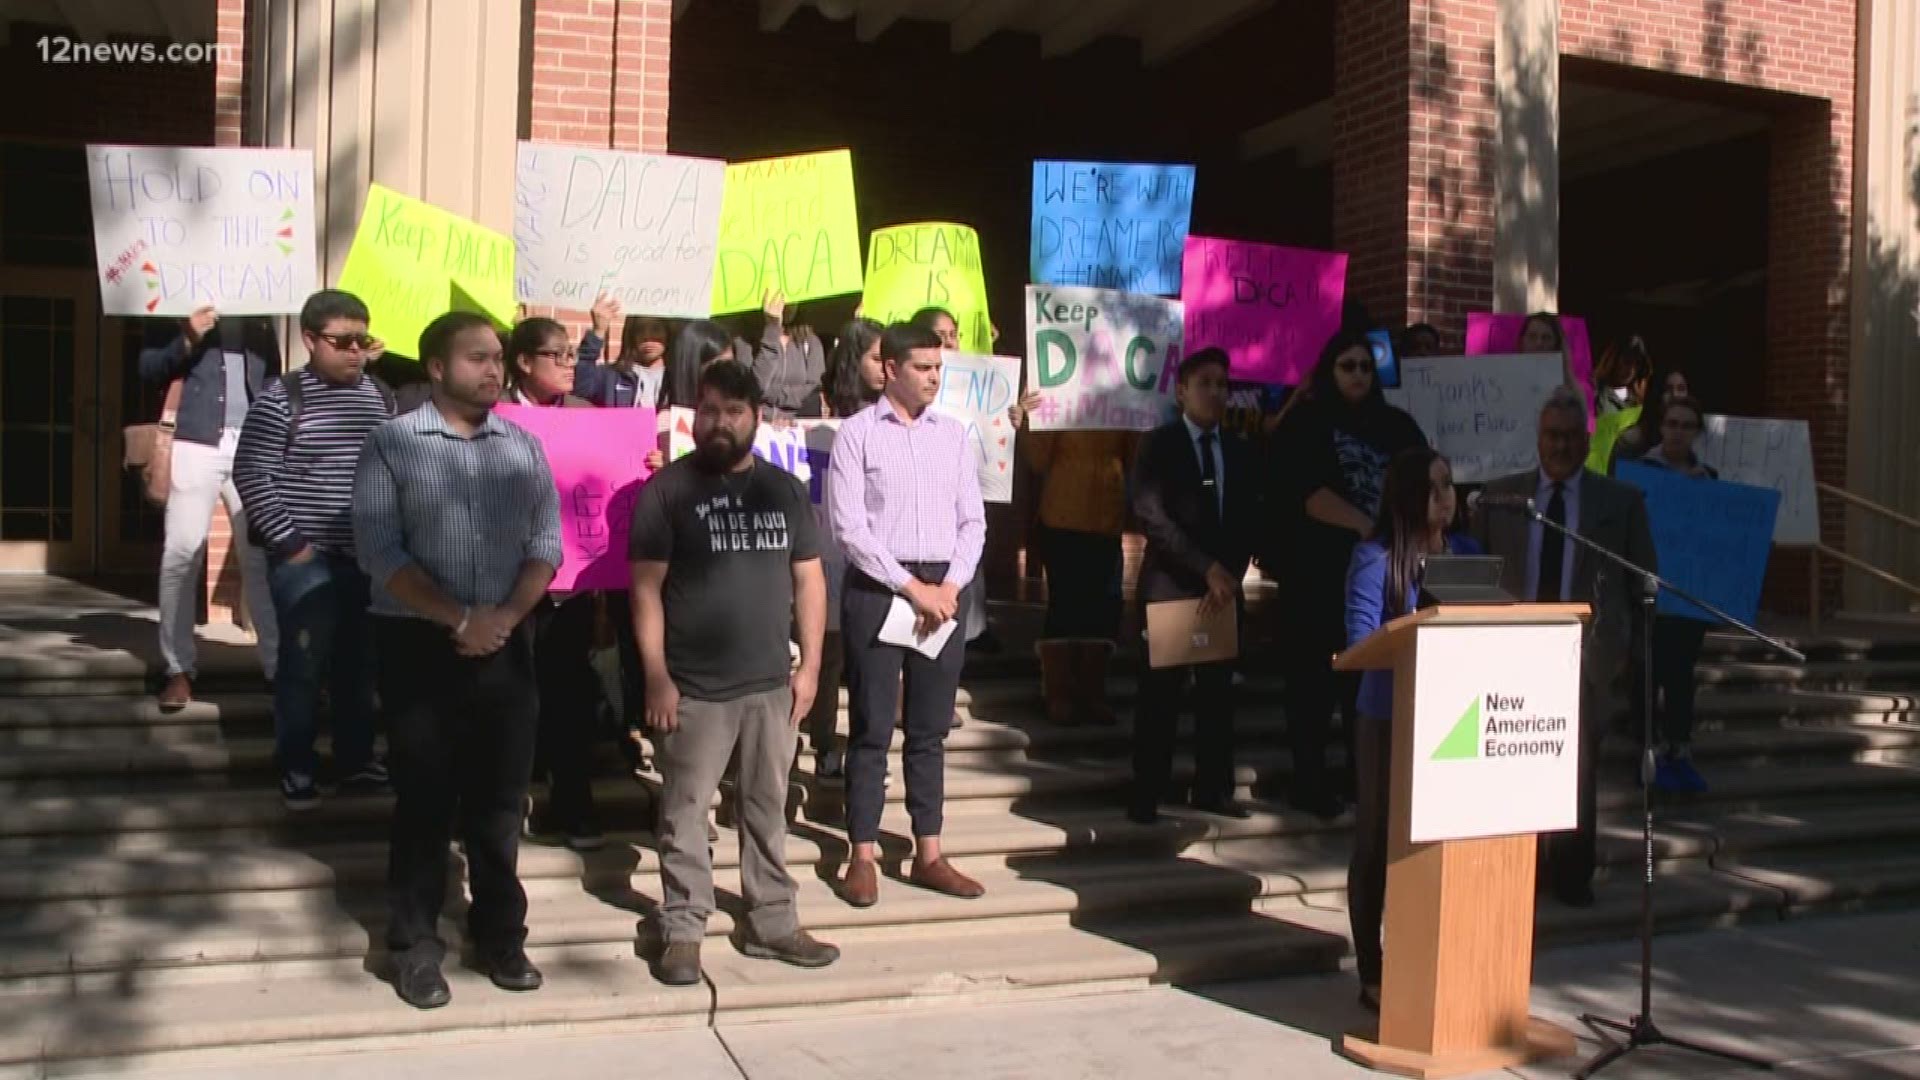 Various groups hosted a  public community forum and march as part of the "iMarch for Immigration Campaign" in support of DACA.